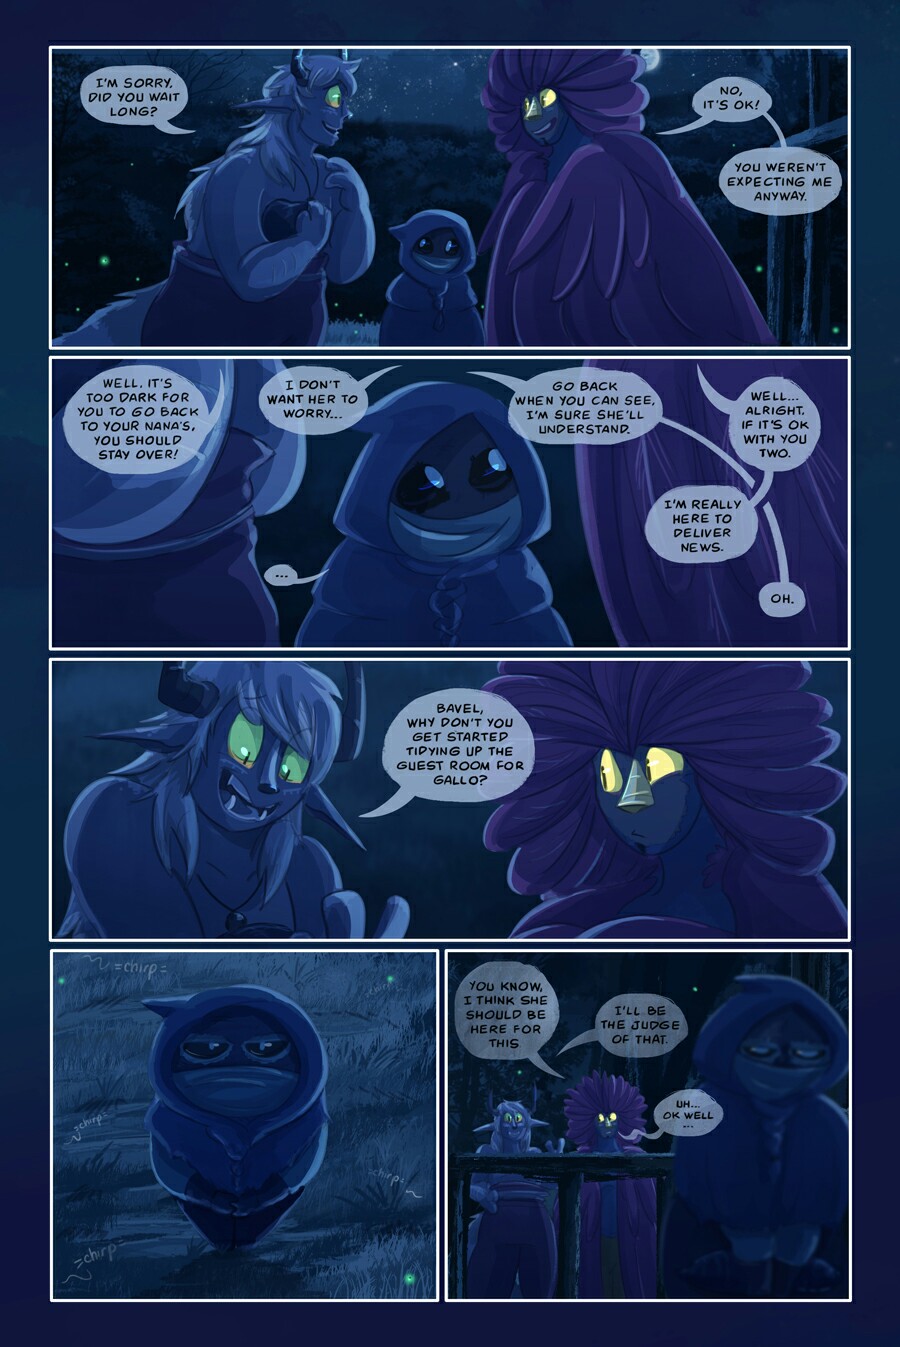 Chapter 6, page 5